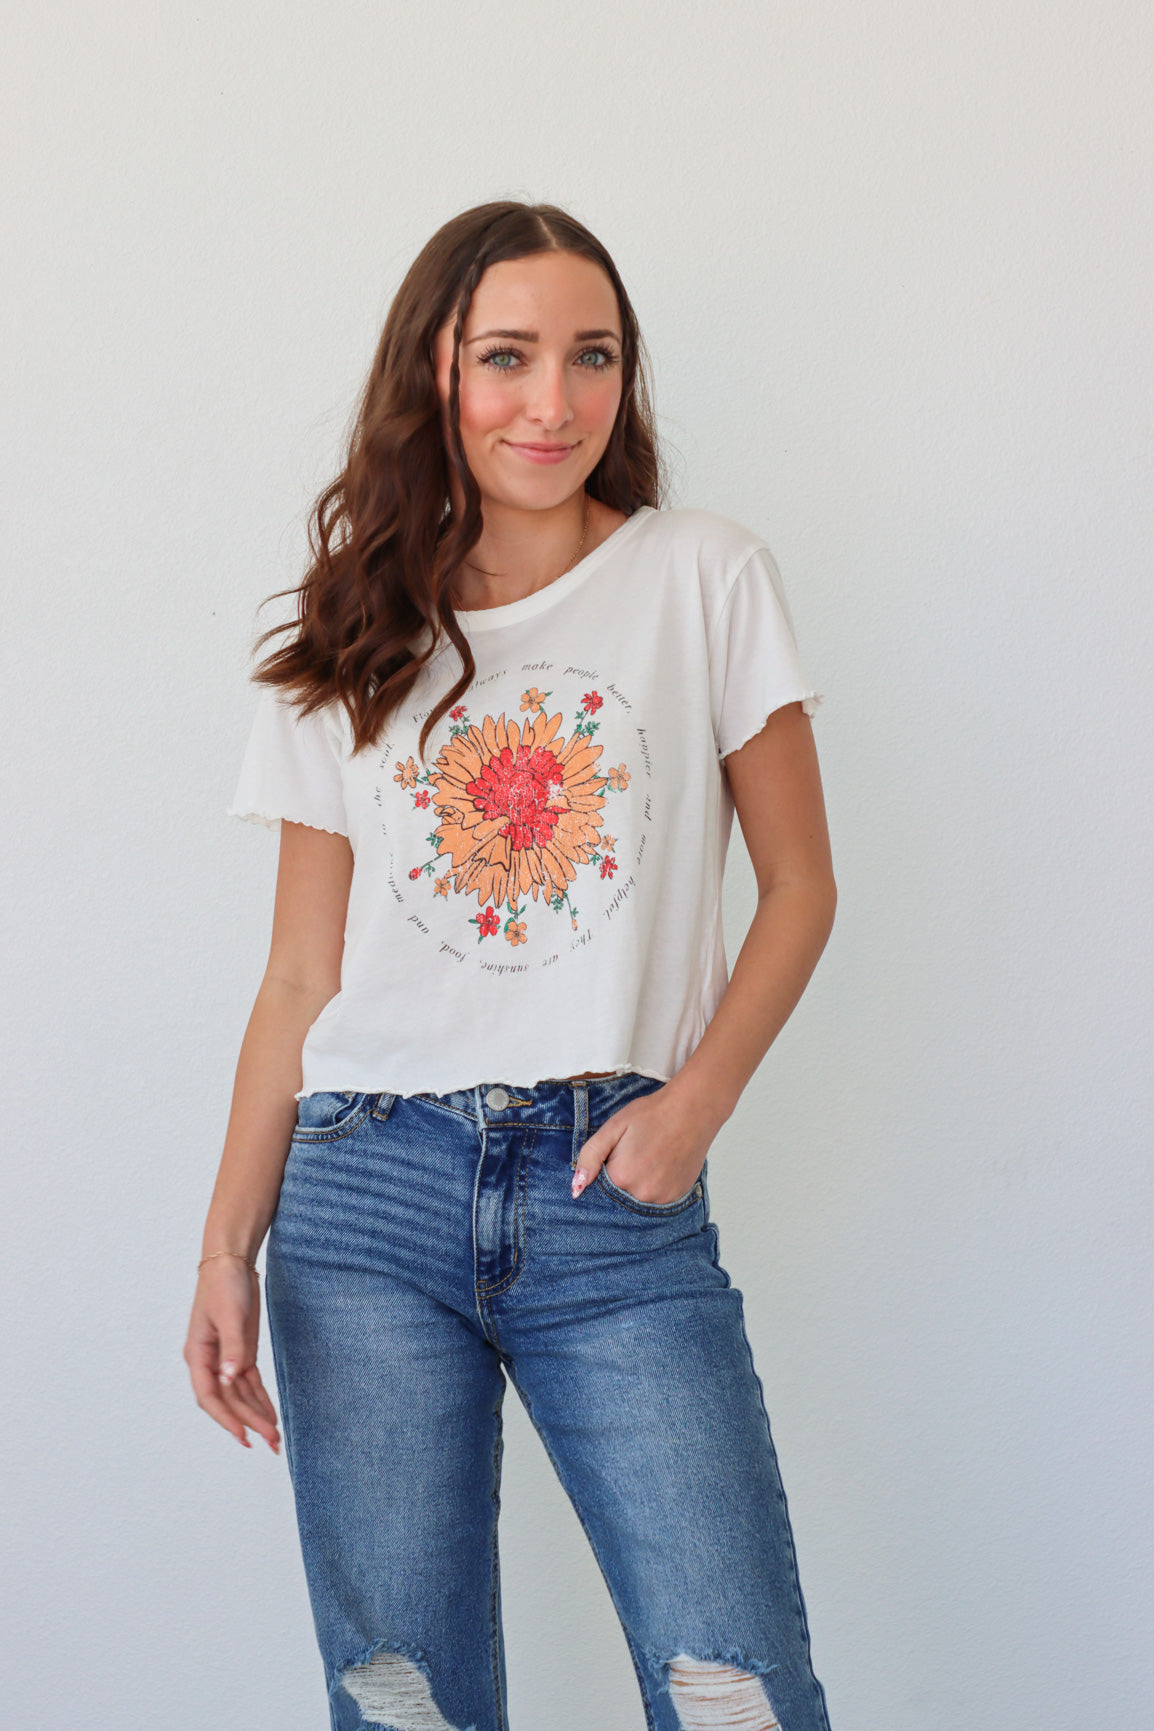 girl wearing white t-shirt with floral graphic